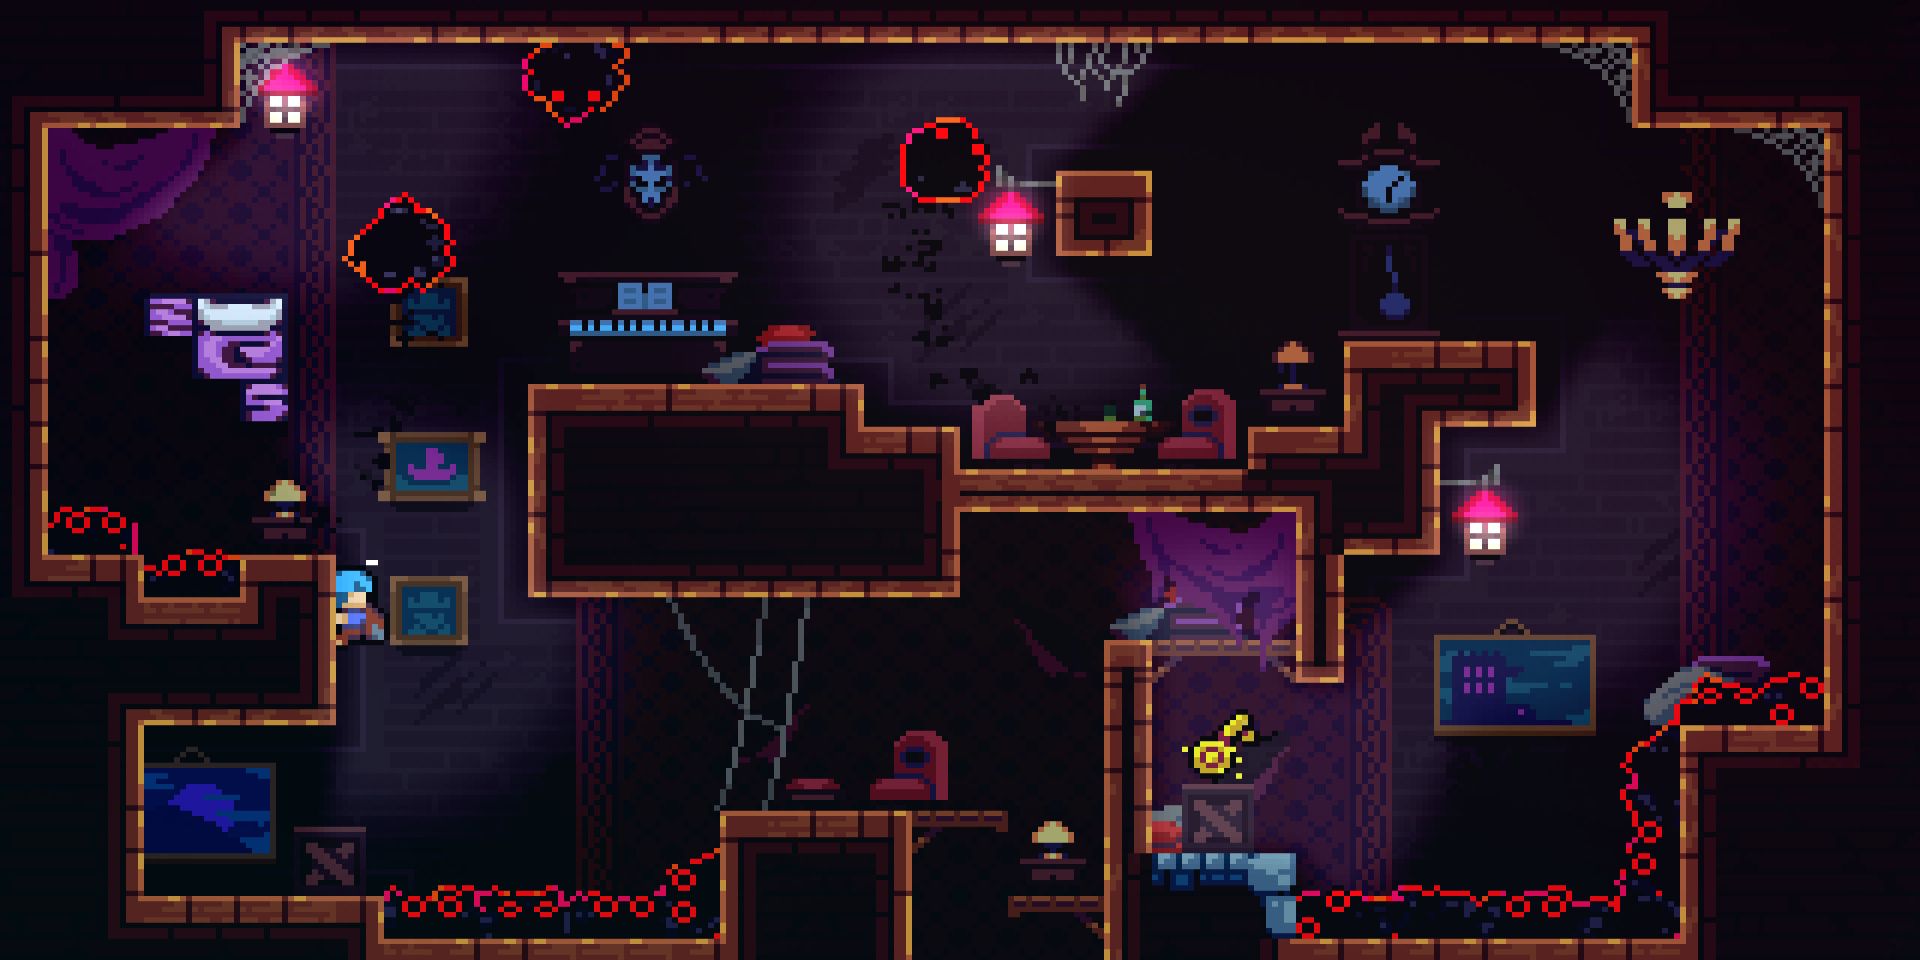 Gameplay from the 2018 platforming video game Celeste.